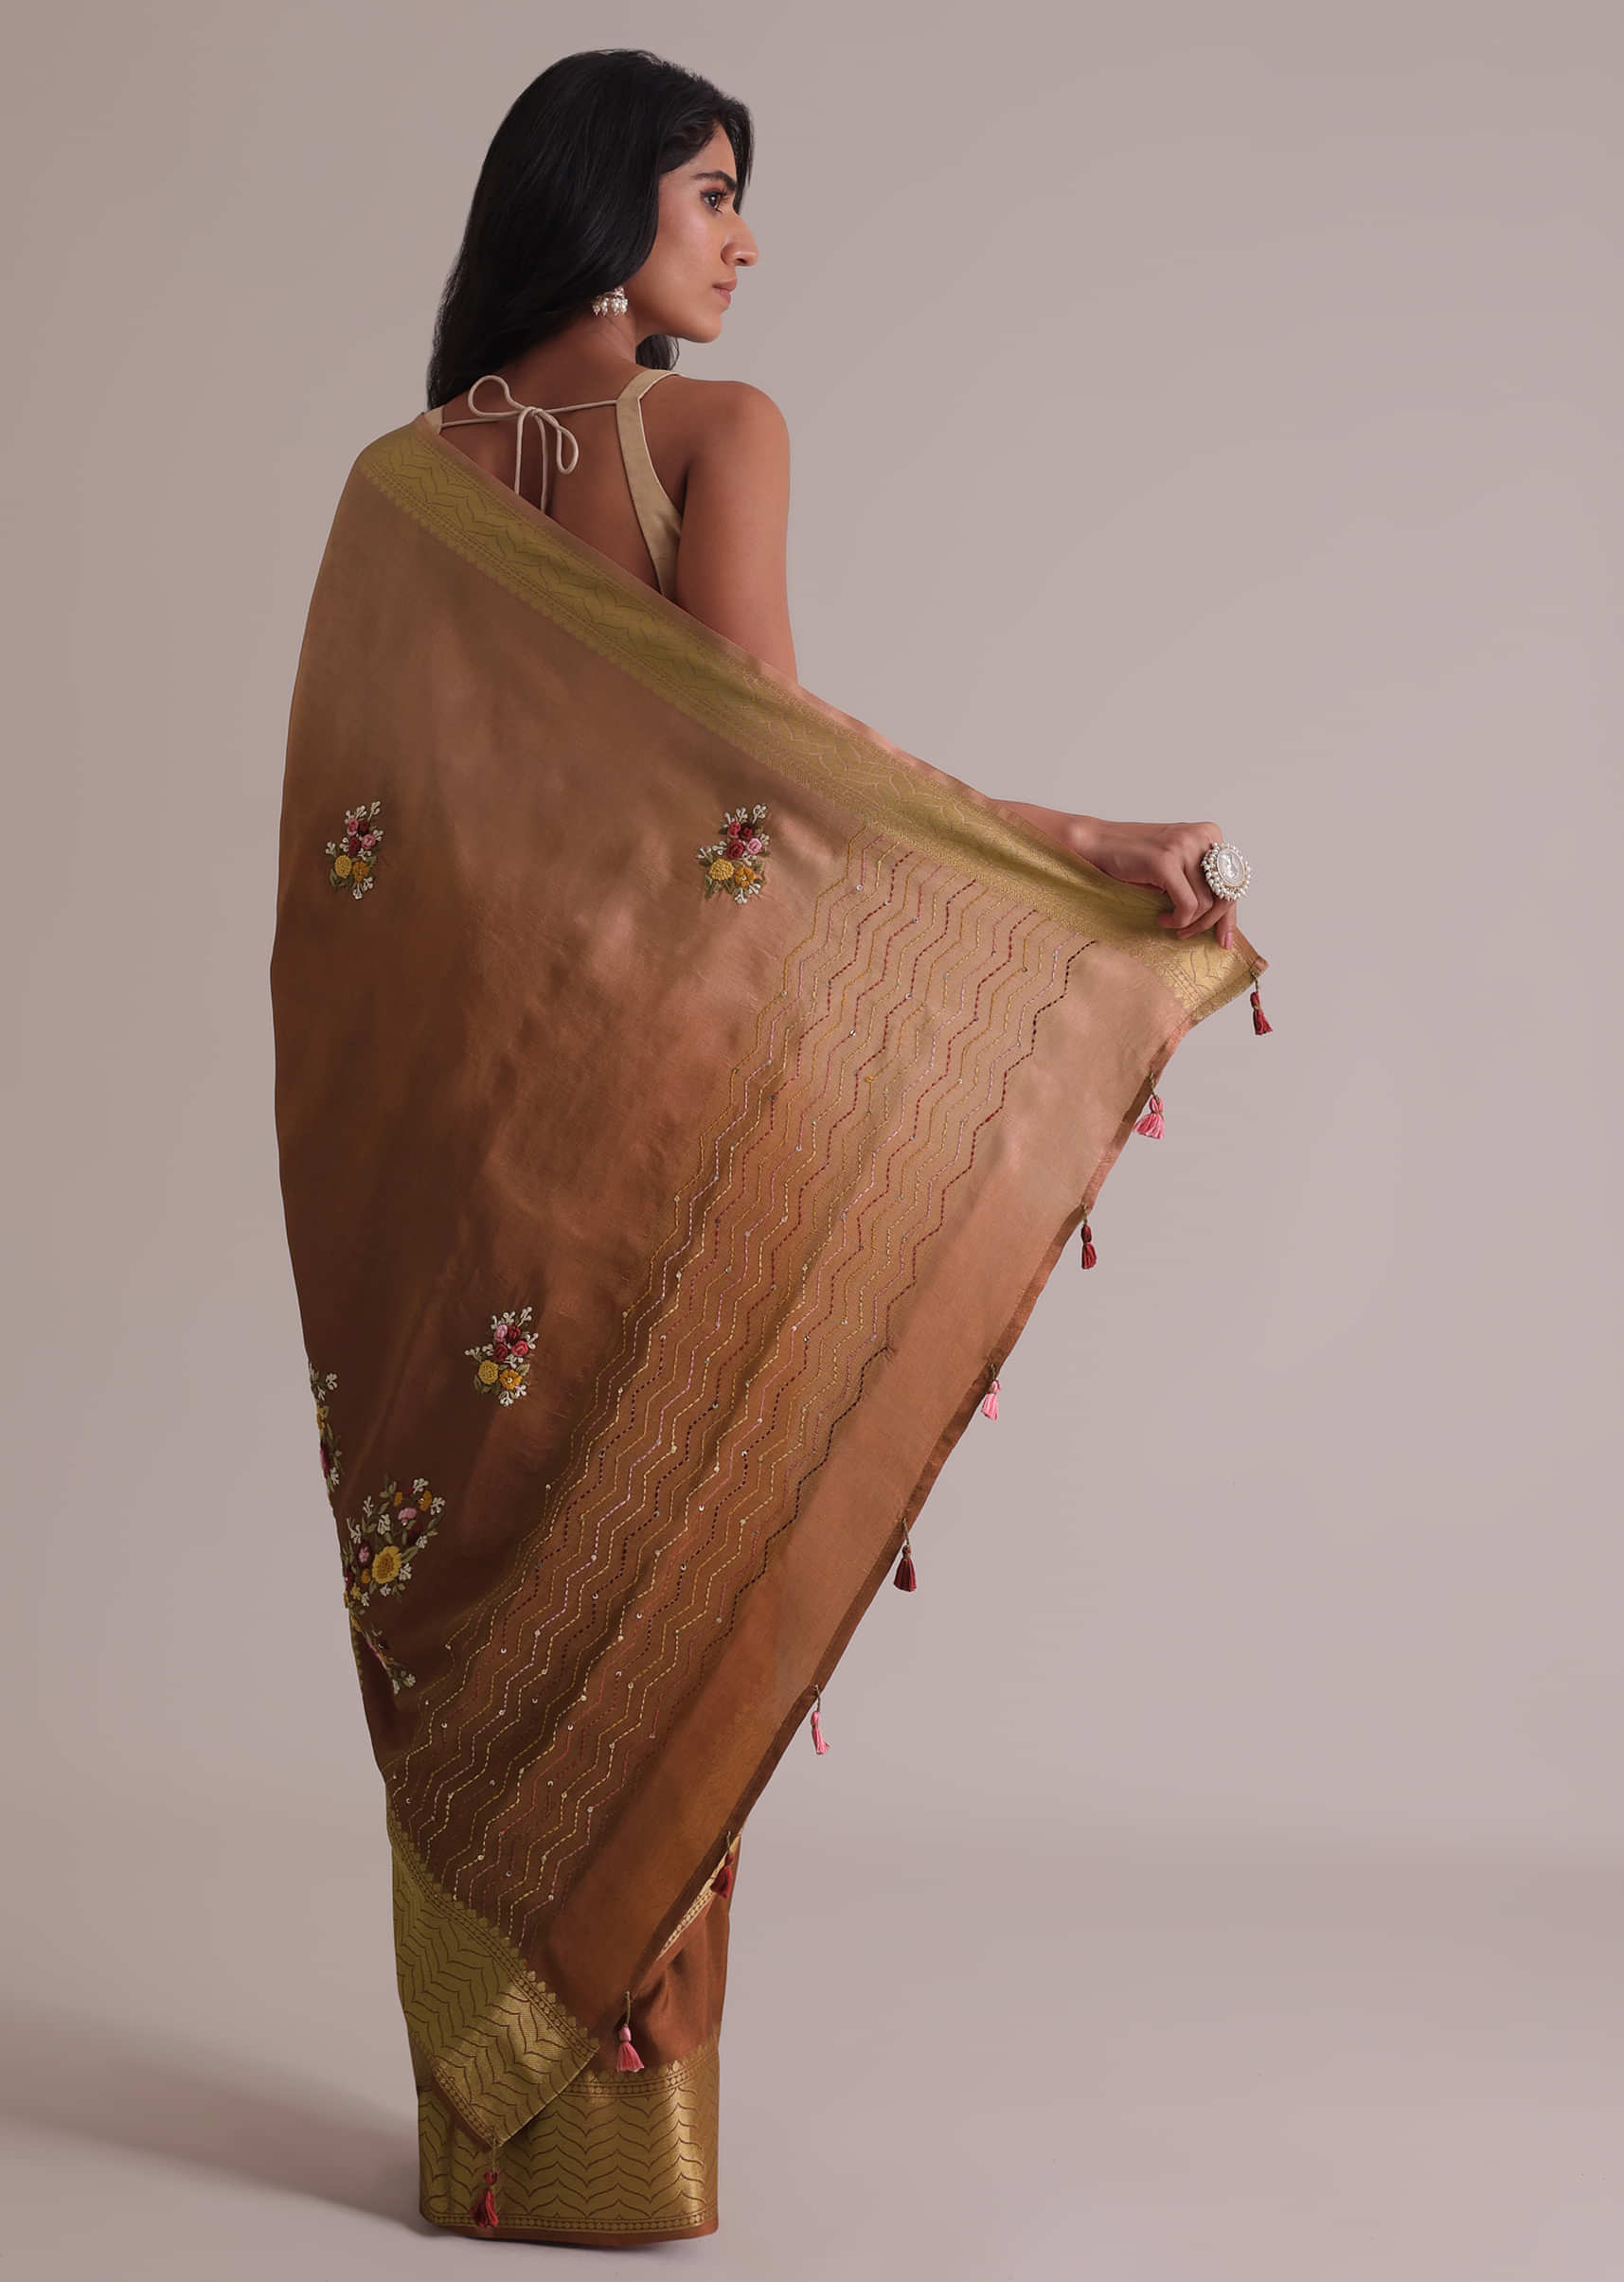 Peach And Brown Resham 3D Bud Embroidered Ombre Saree With Brocade And Thread Work In Dola Crepe